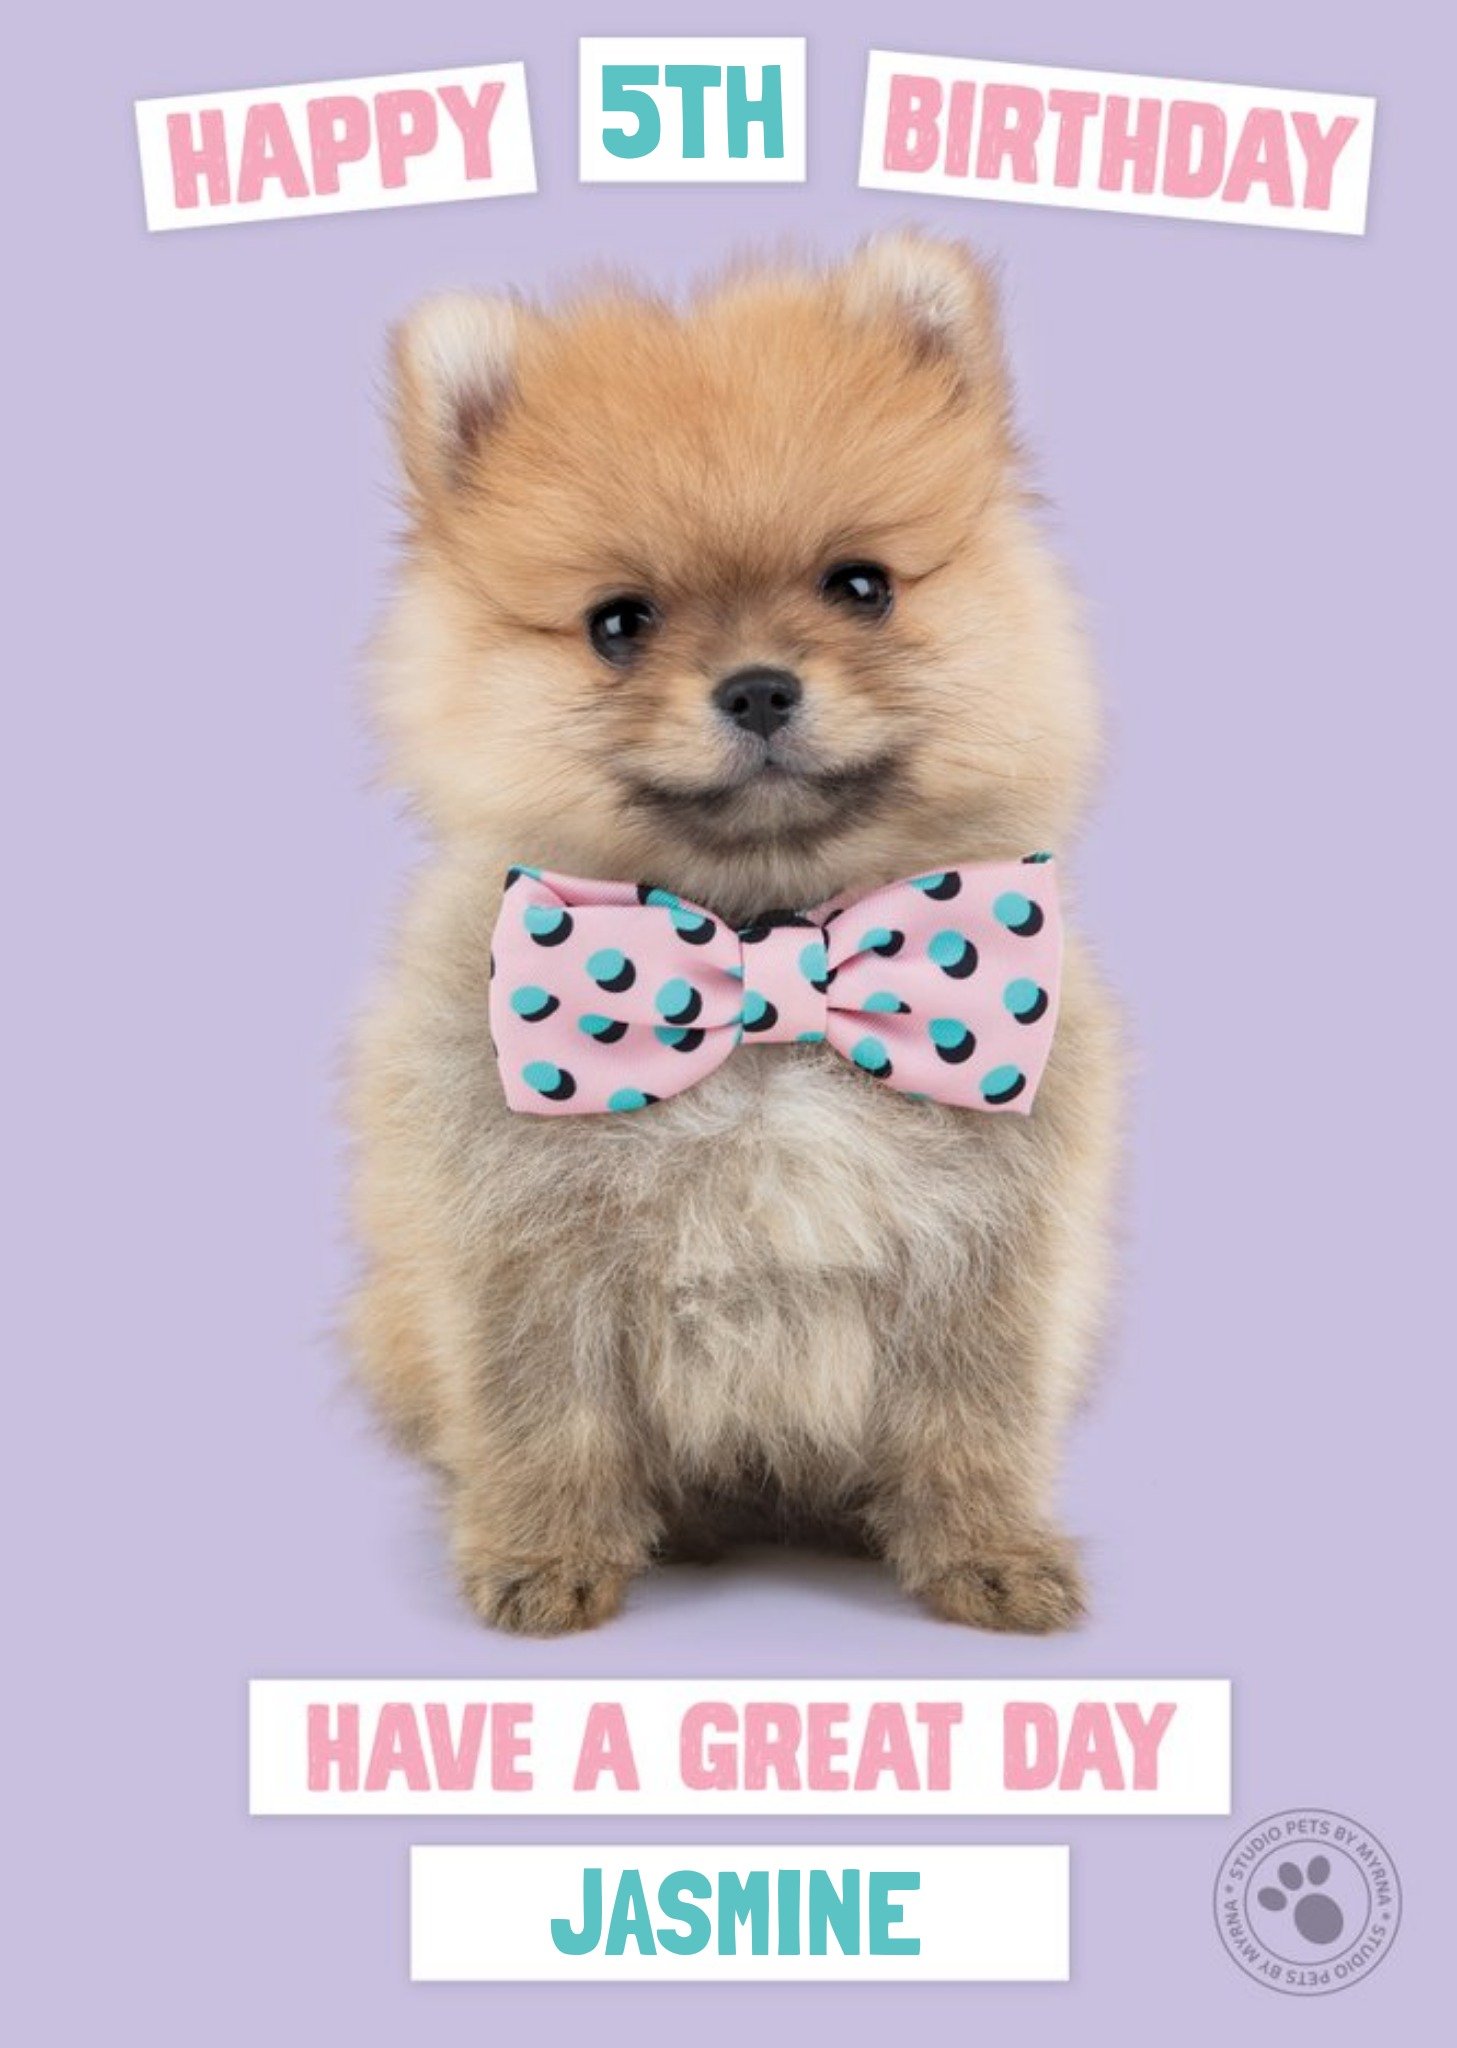 Studio Pets Birthday Card Pomeranian Puppy With A Bow-Tie, Large